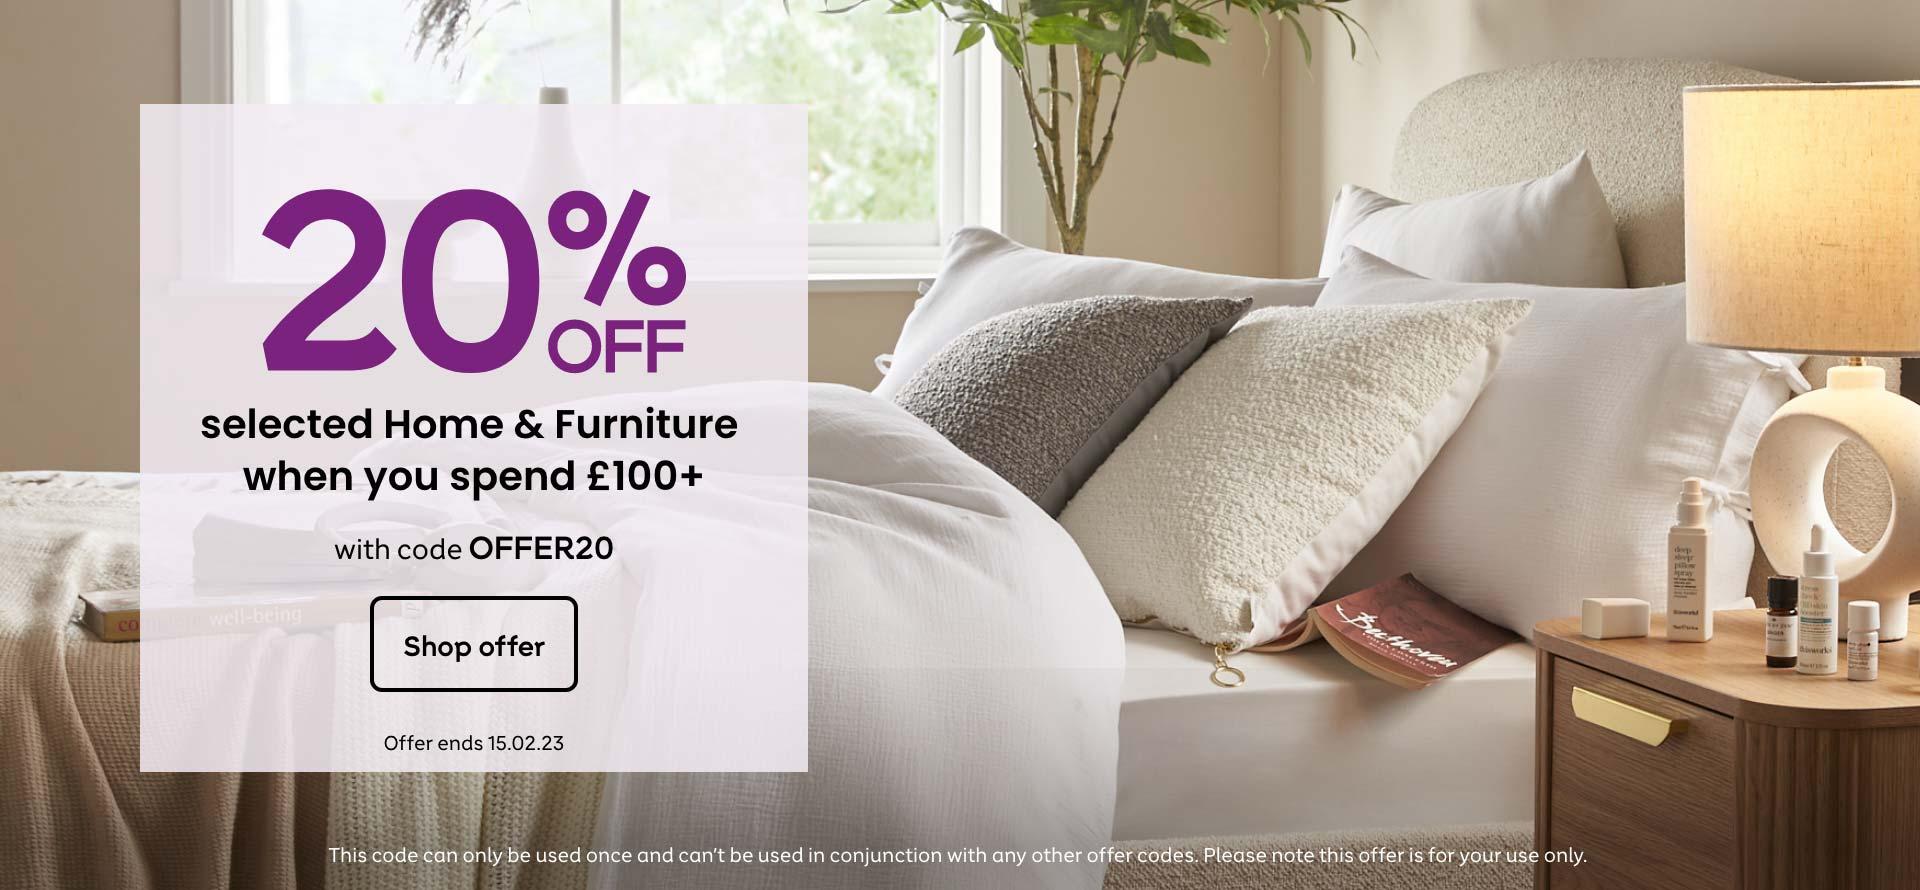 20% off selected home & furniture when you spend £100 or more with code OFFER20. Shop now. Offer ends 15.02.23